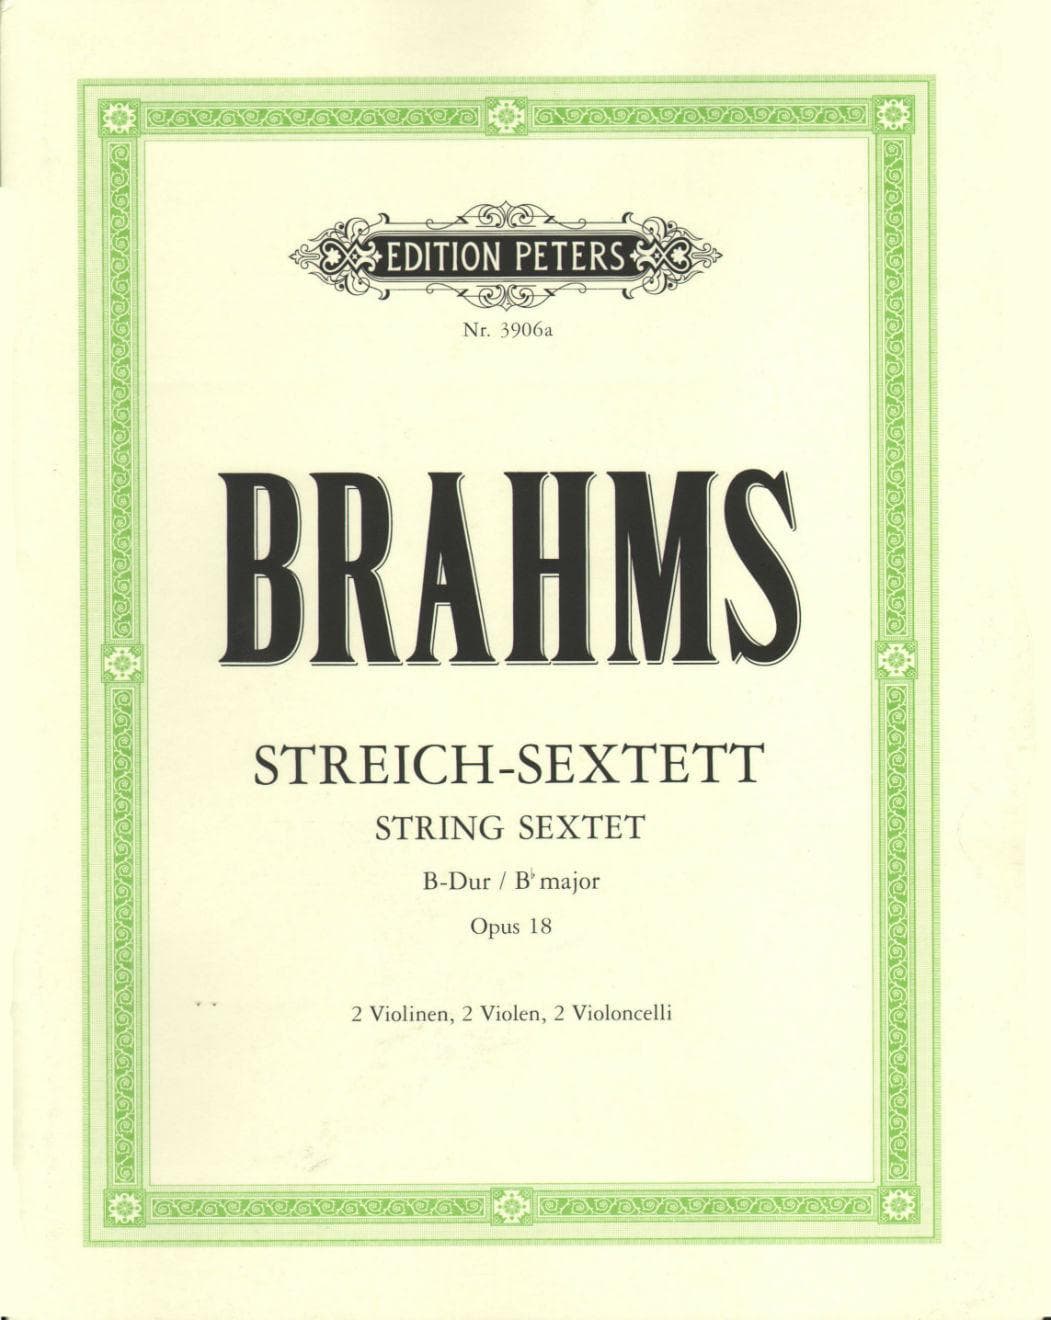 Brahms, Johannes - Sextet No 1 In B-Flat Major, Op 18 - Two Violins, Two Violas and Two Cellos - Set of Parts - Edition Peters